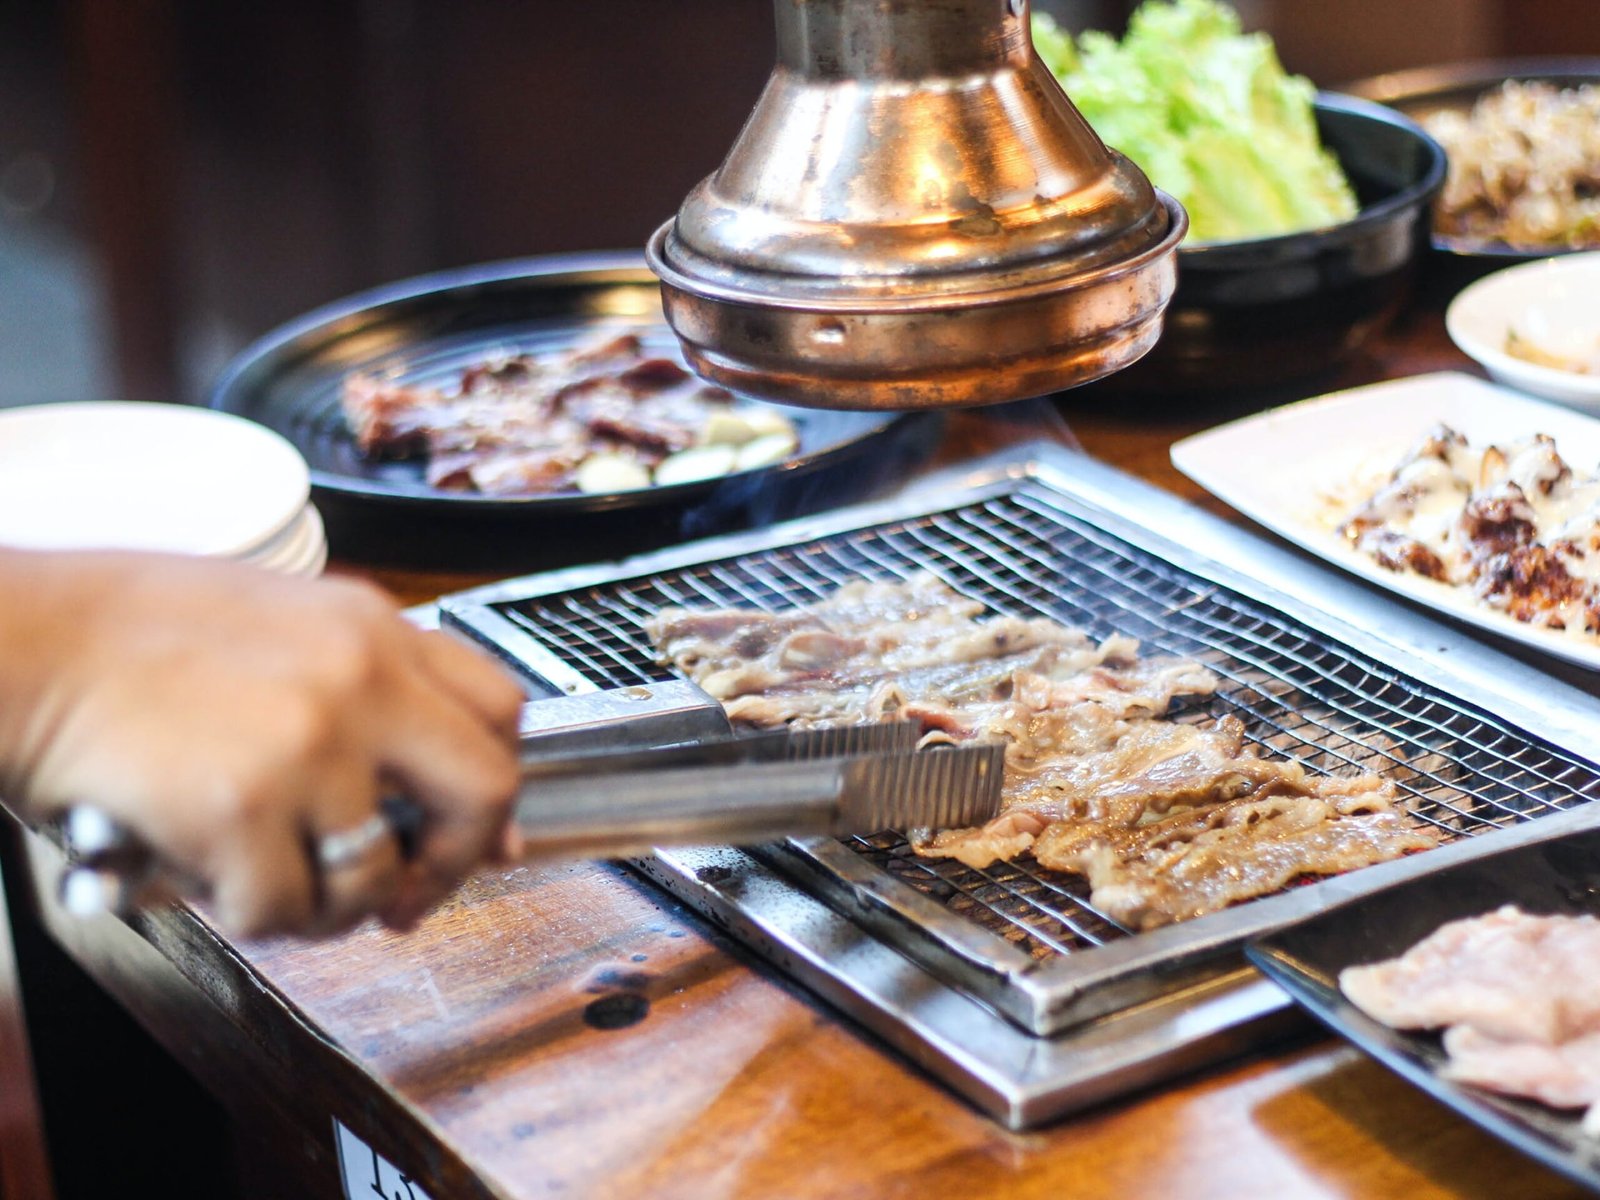 How Does The Concept Of umami Manifest In Korean Cooking?